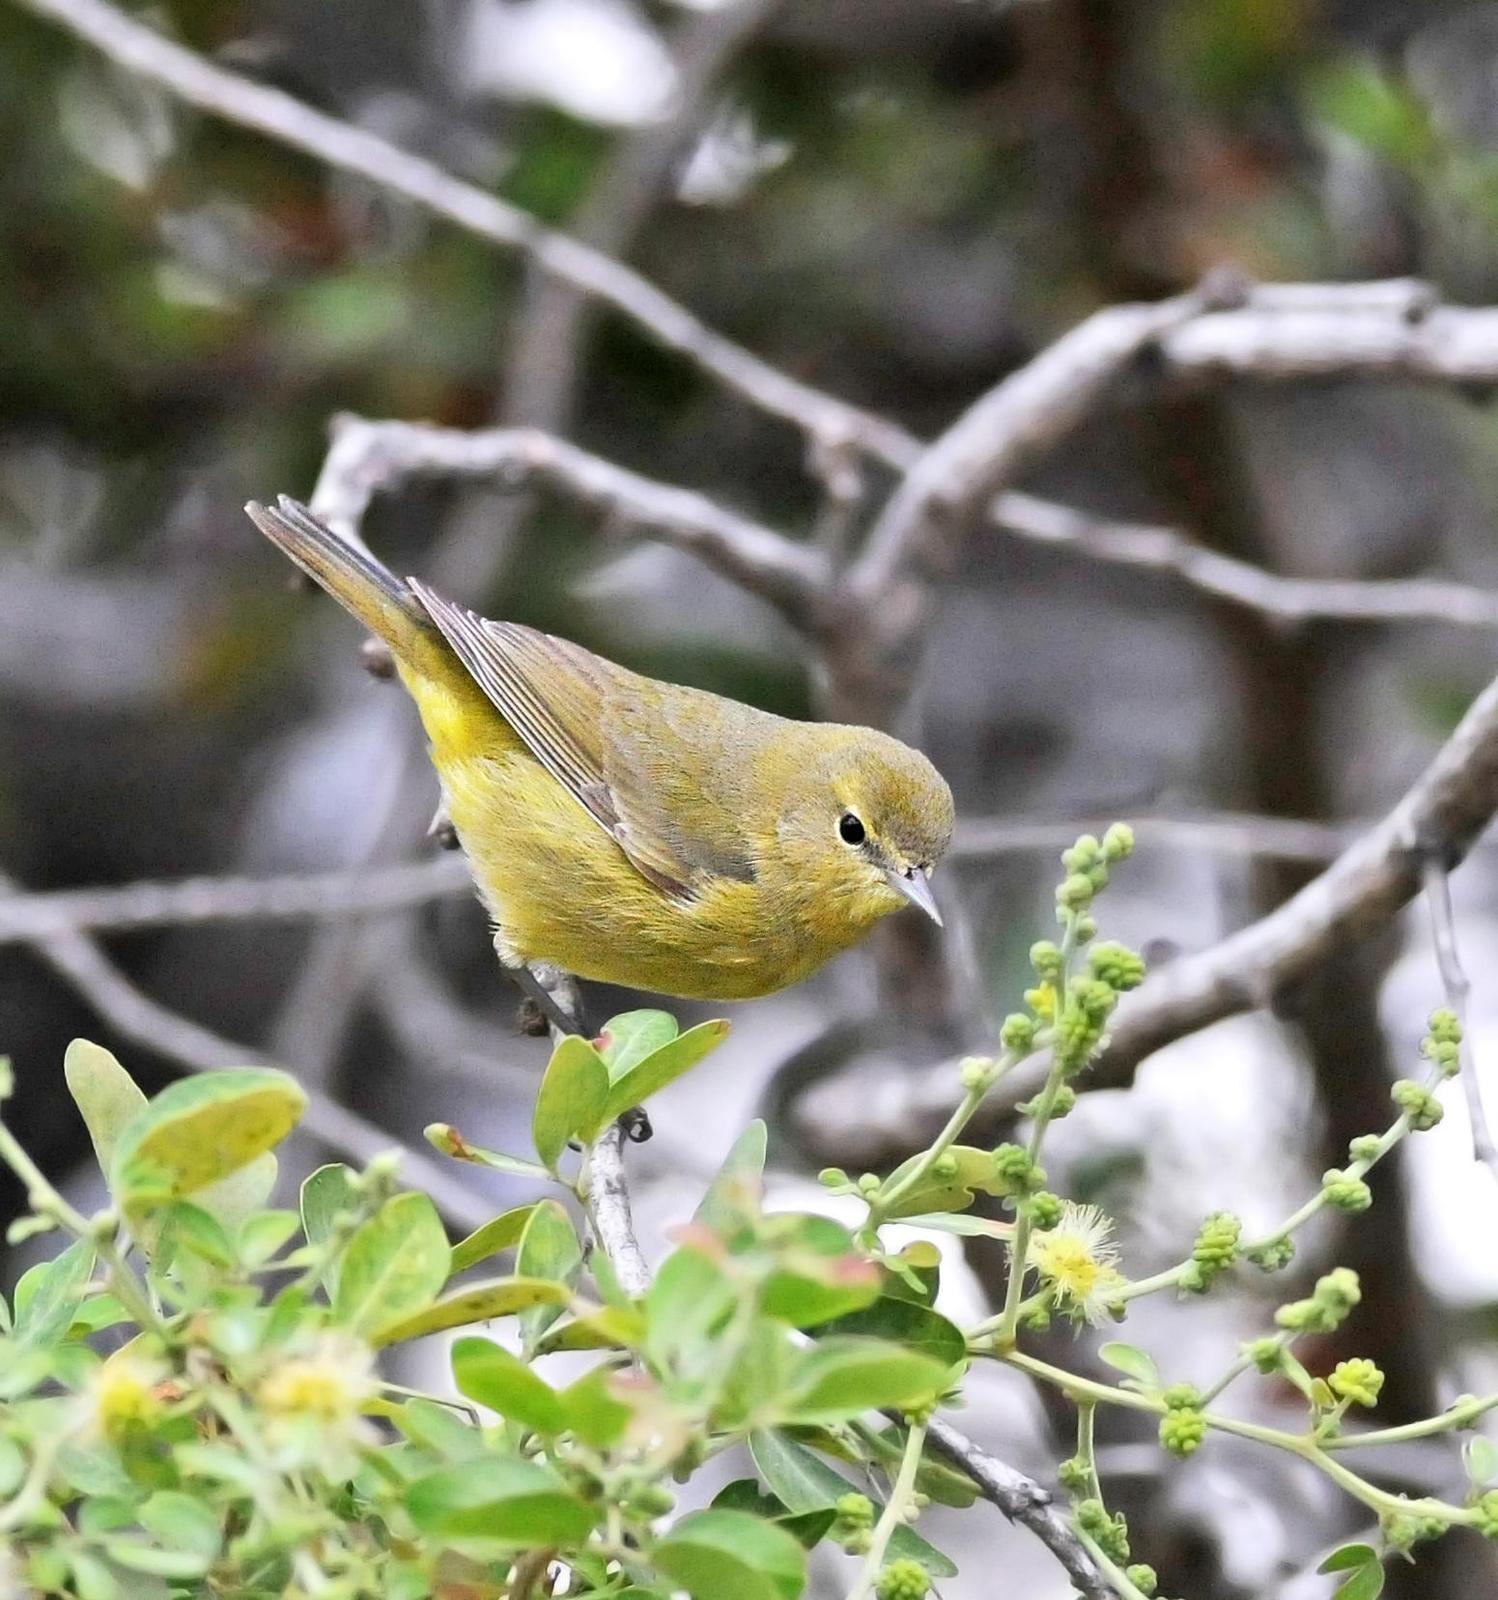 Orange-crowned Warbler (lutescens) Photo by Steven Mlodinow